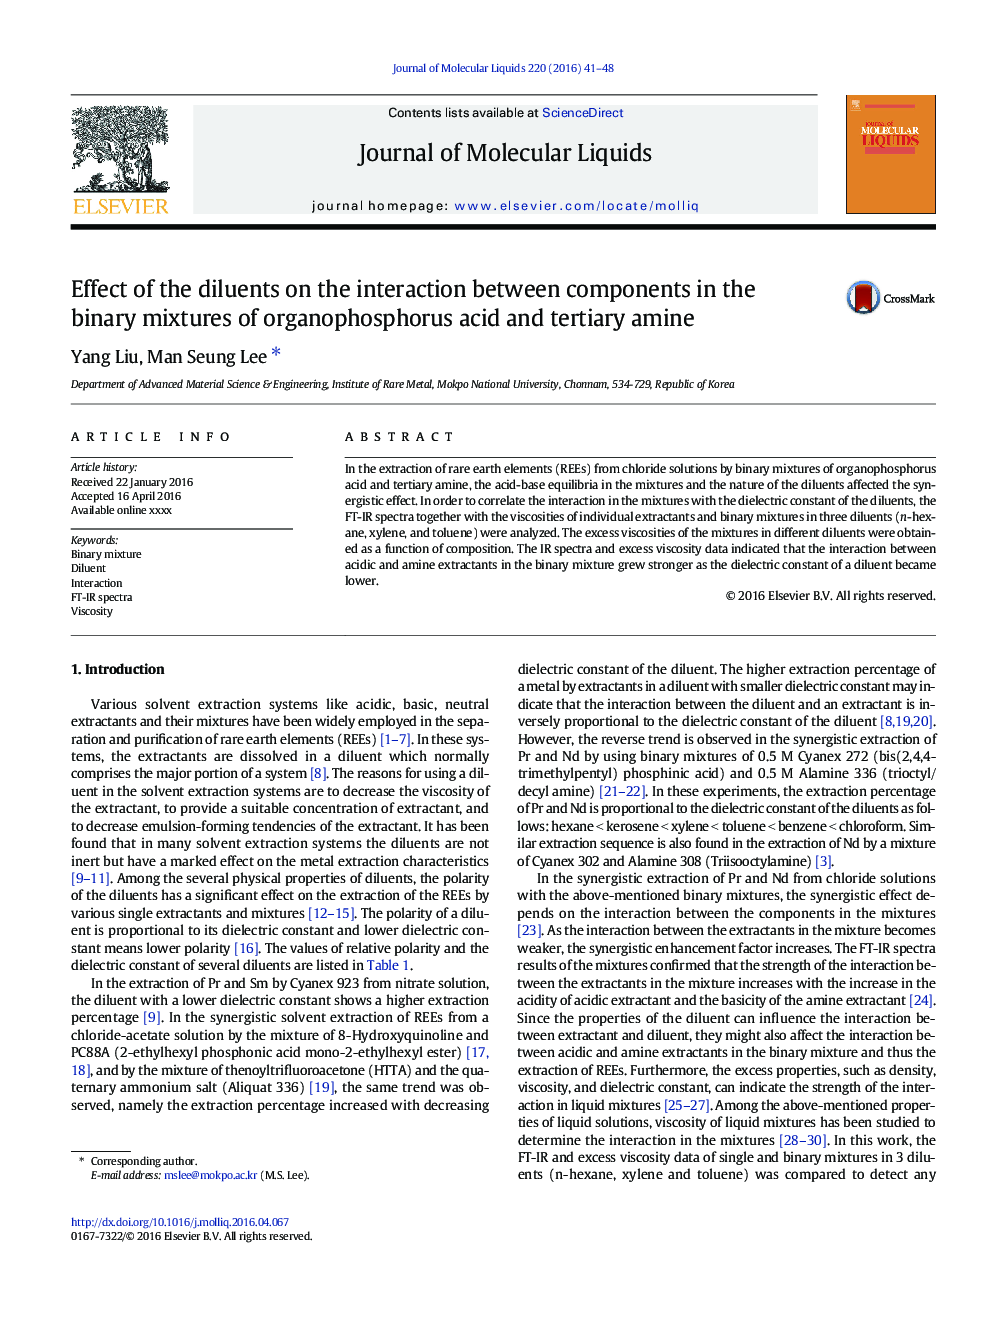 Effect of the diluents on the interaction between components in the binary mixtures of organophosphorus acid and tertiary amine